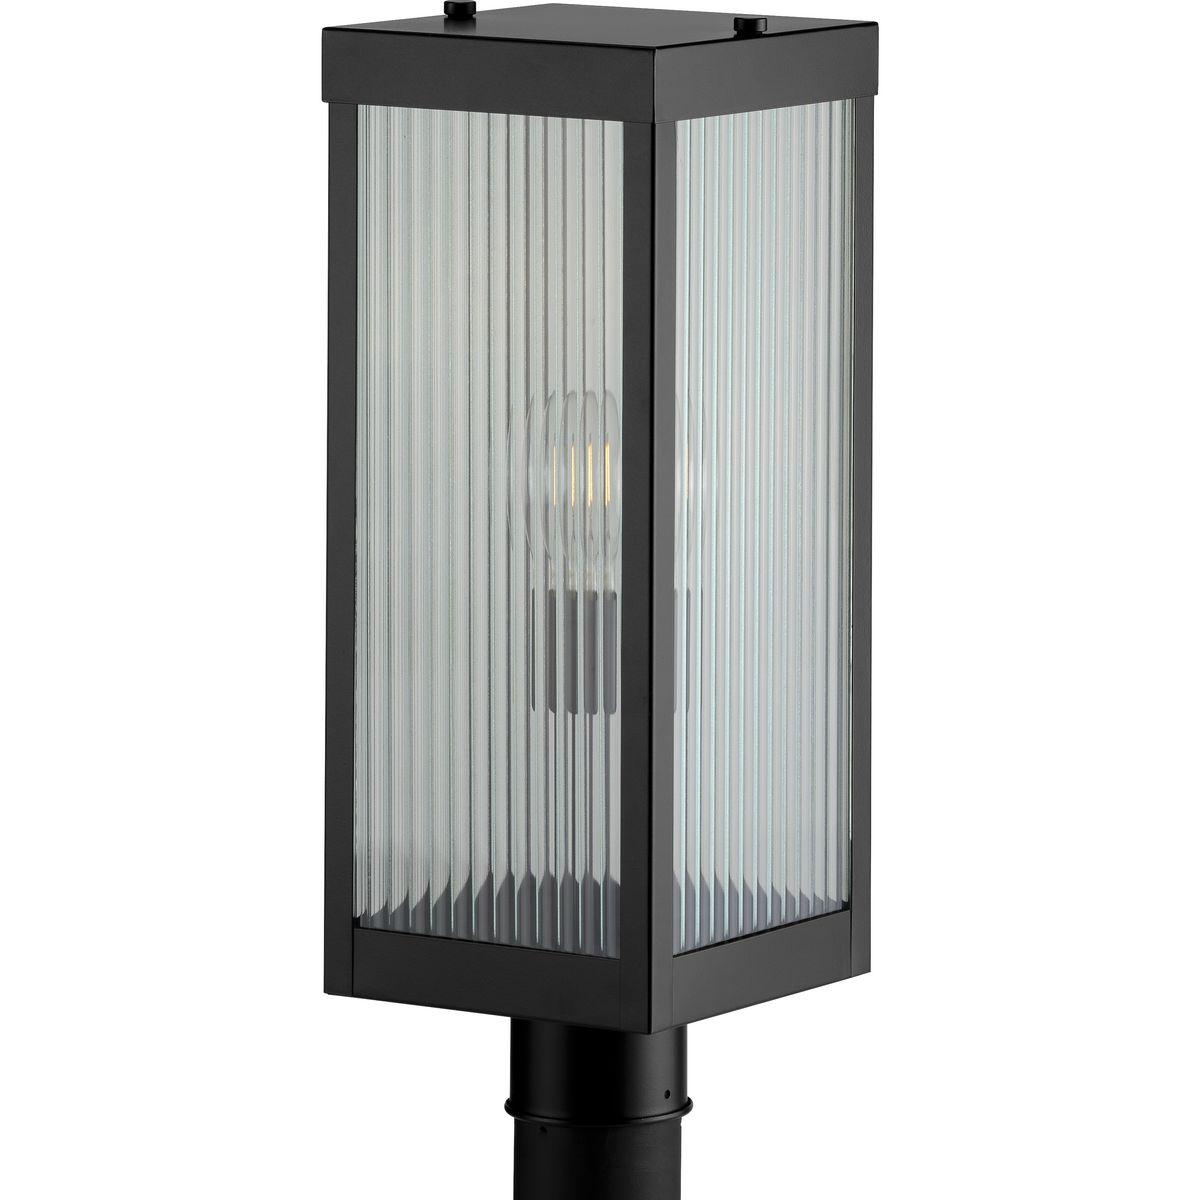 Hubbell P540024-031 Achieve the stylish and peaceful home environment you've been waiting for with this beautiful post lantern. The rectangular matte black frame's intelligent design is just right for illuminating any outdoor space in need of illumination. The frame holds el